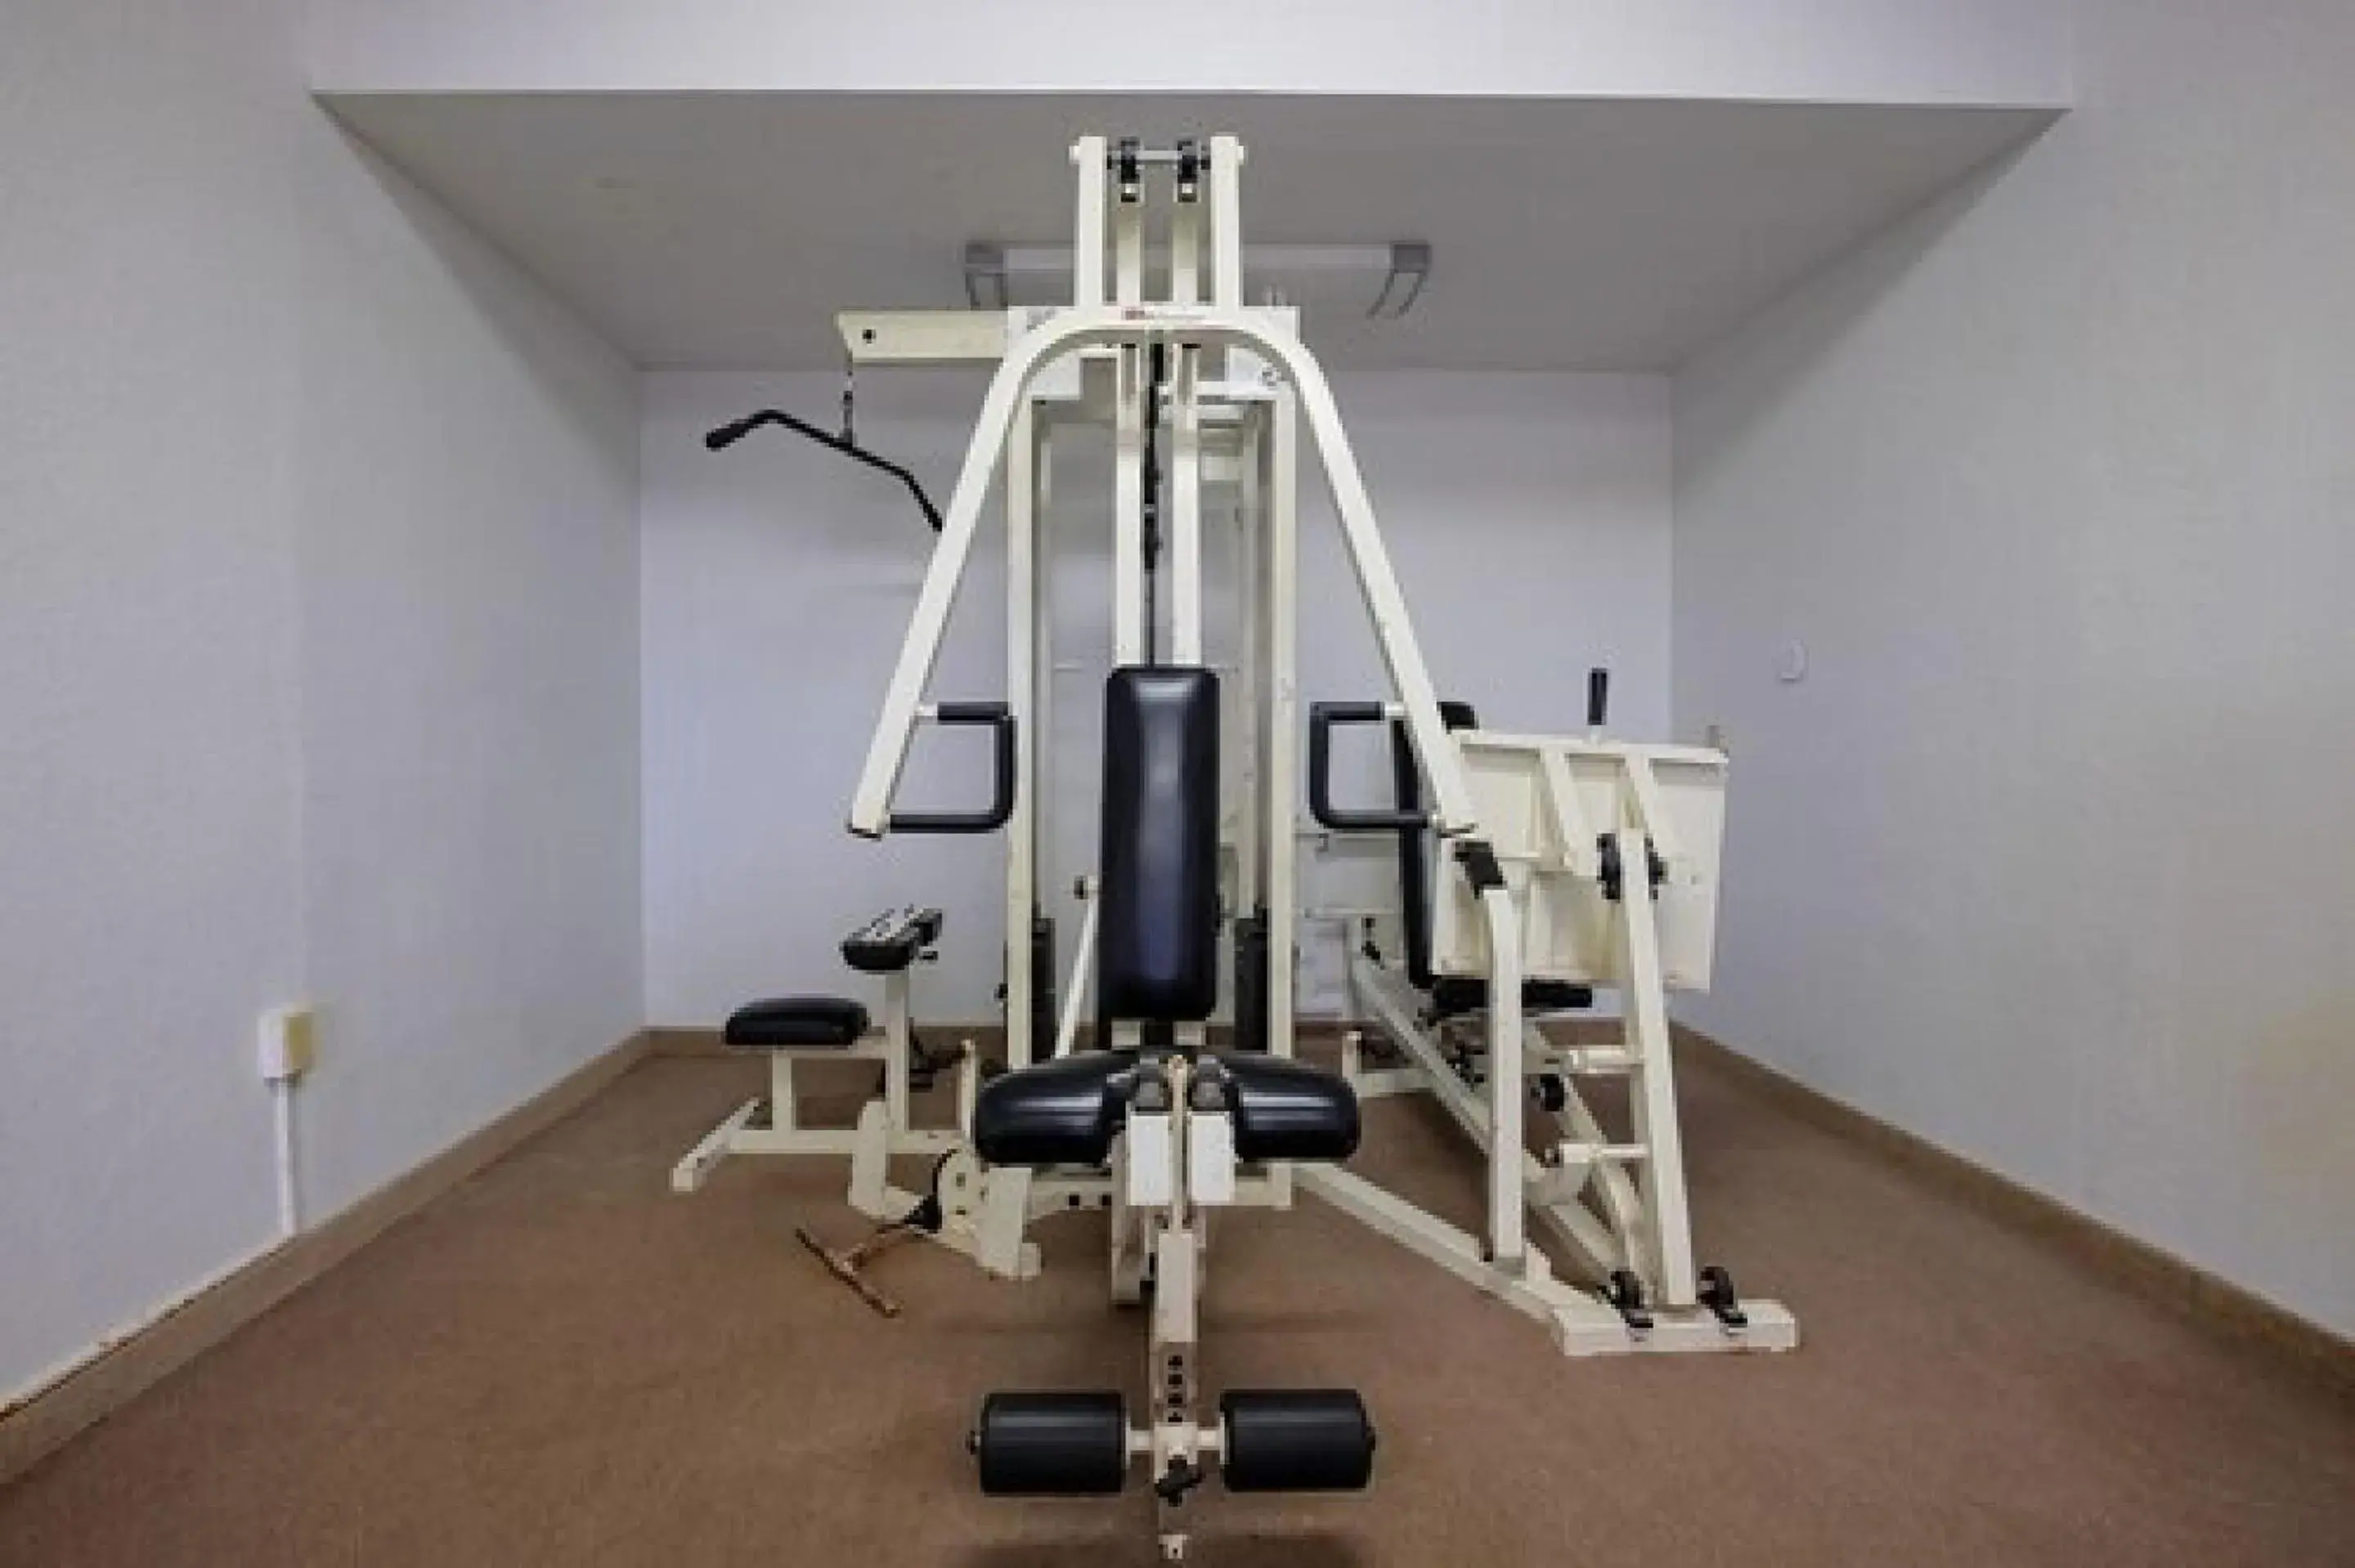 Fitness centre/facilities, Fitness Center/Facilities in OYO Hotel Kingsville - Hwy 77